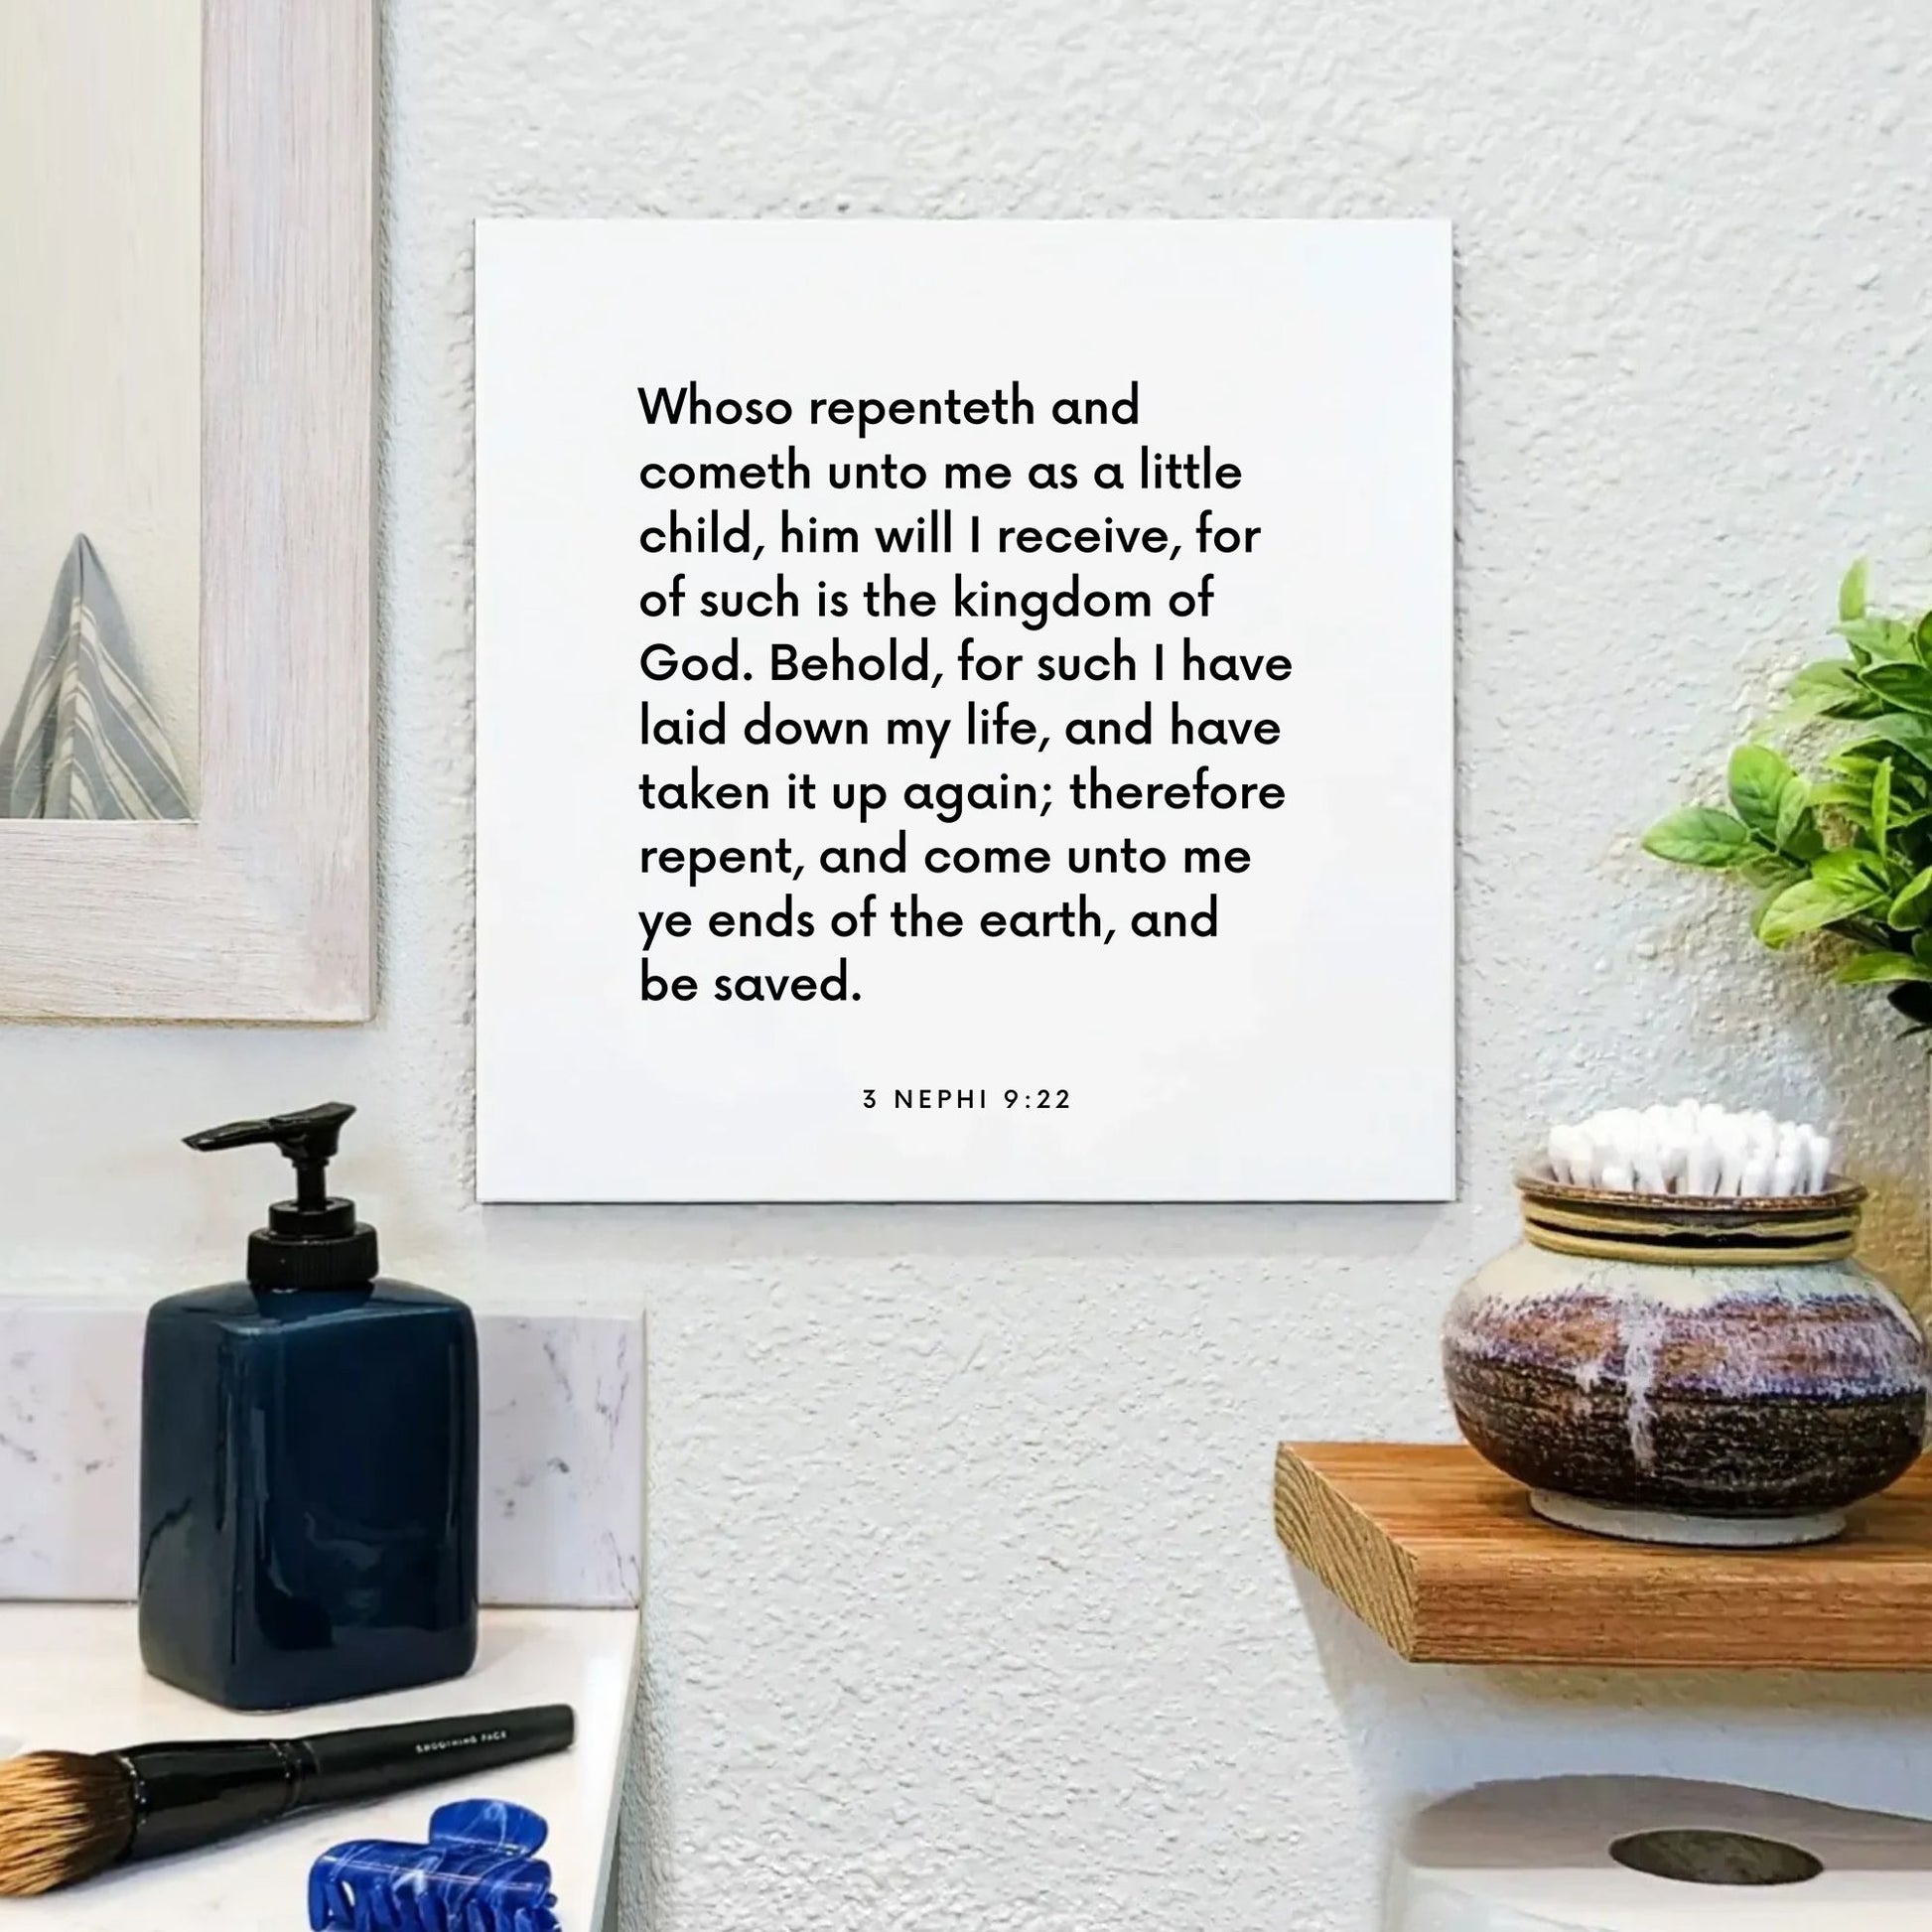 Bathroom mouting of the scripture tile for 3 Nephi 9:22 - "Whoso repenteth and cometh unto me as a little child"